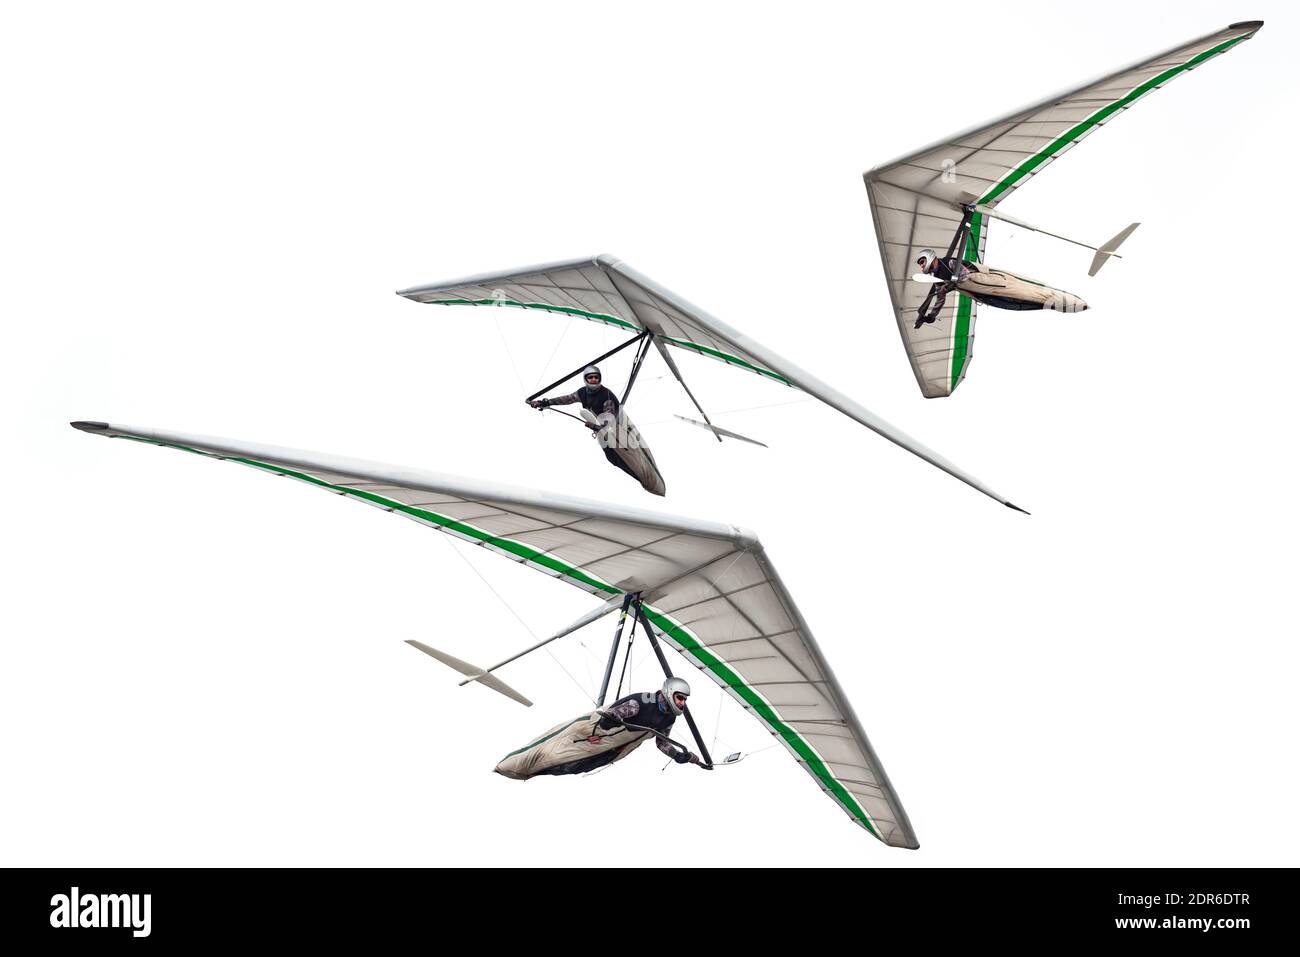 Set of modern hang glider wings isolated on white. Hangglider wing silhouettes Stock Photo